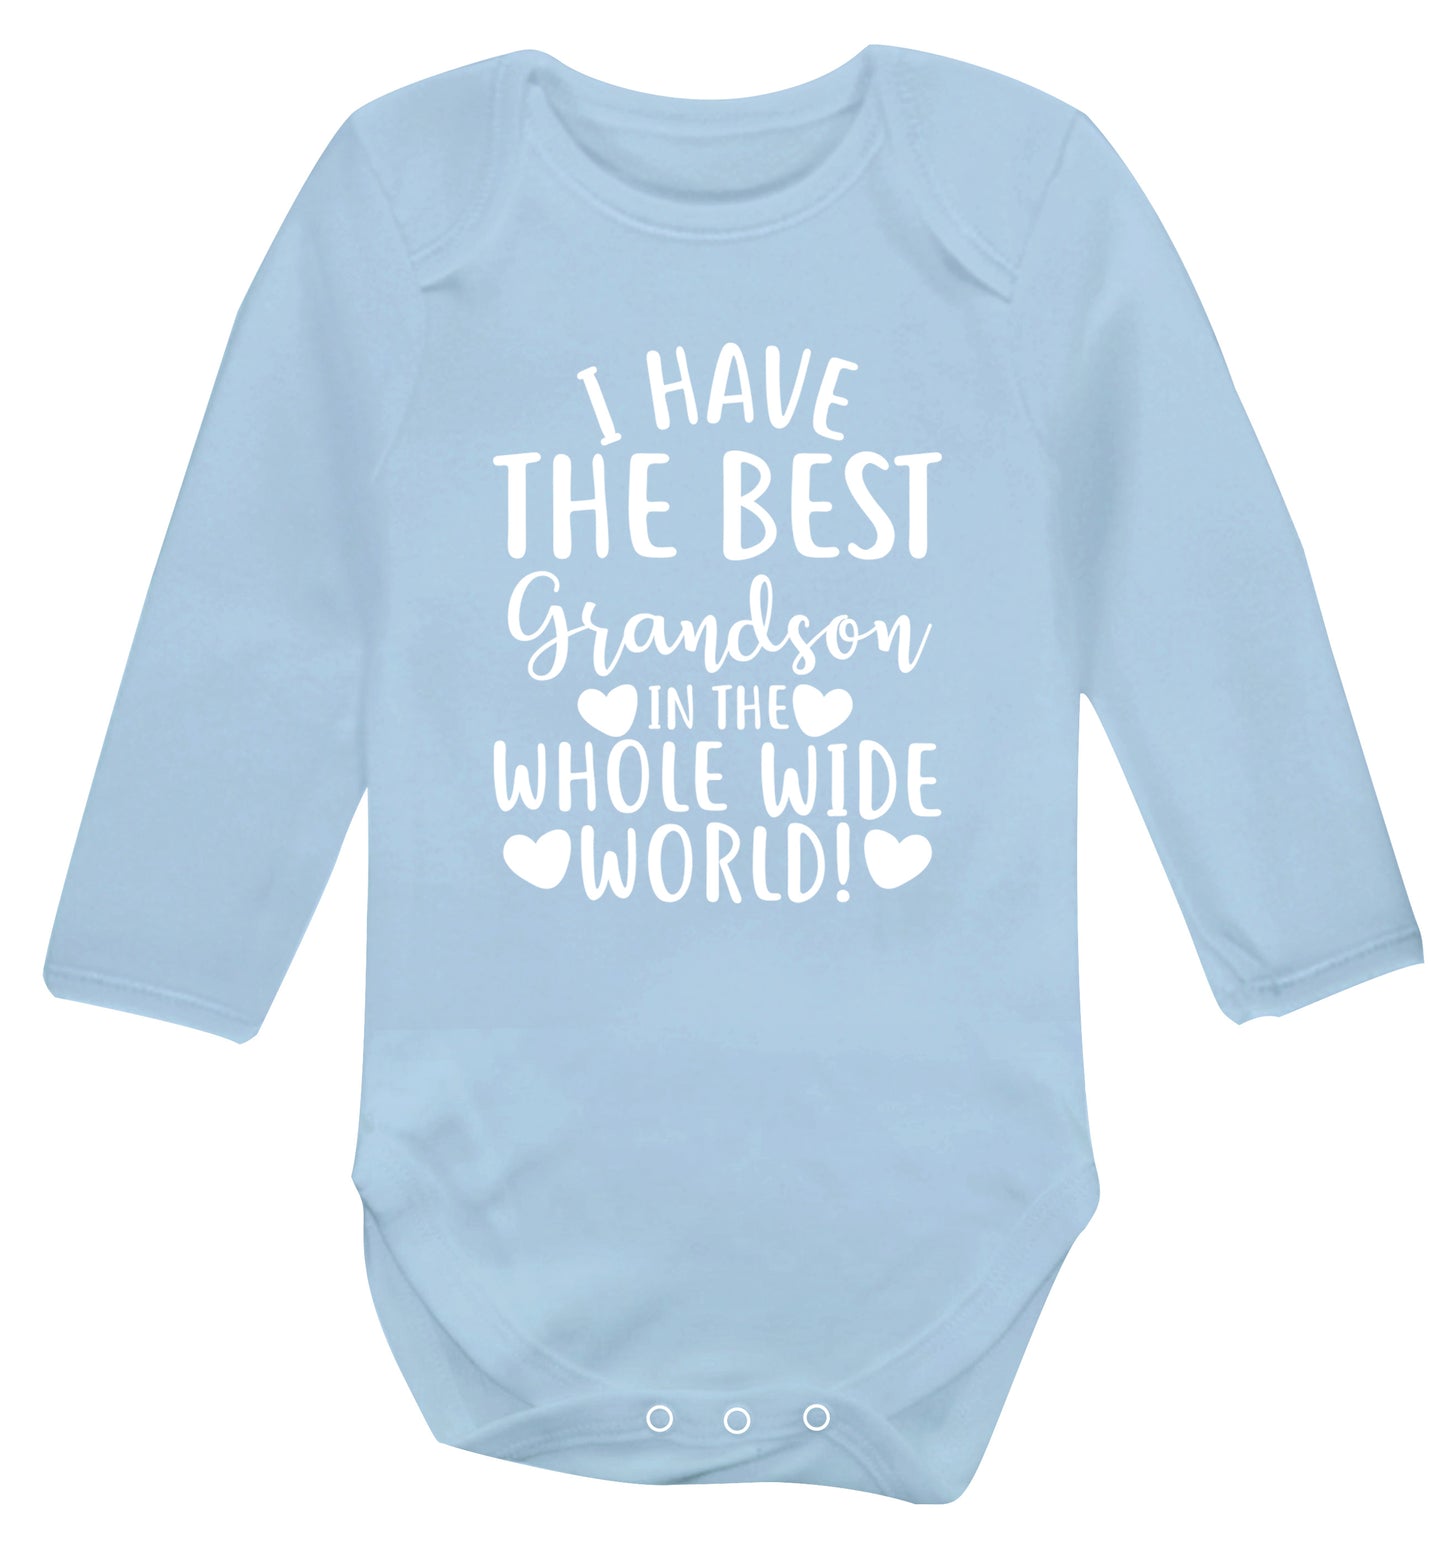 I have the best grandson in the whole wide world! Baby Vest long sleeved pale blue 6-12 months